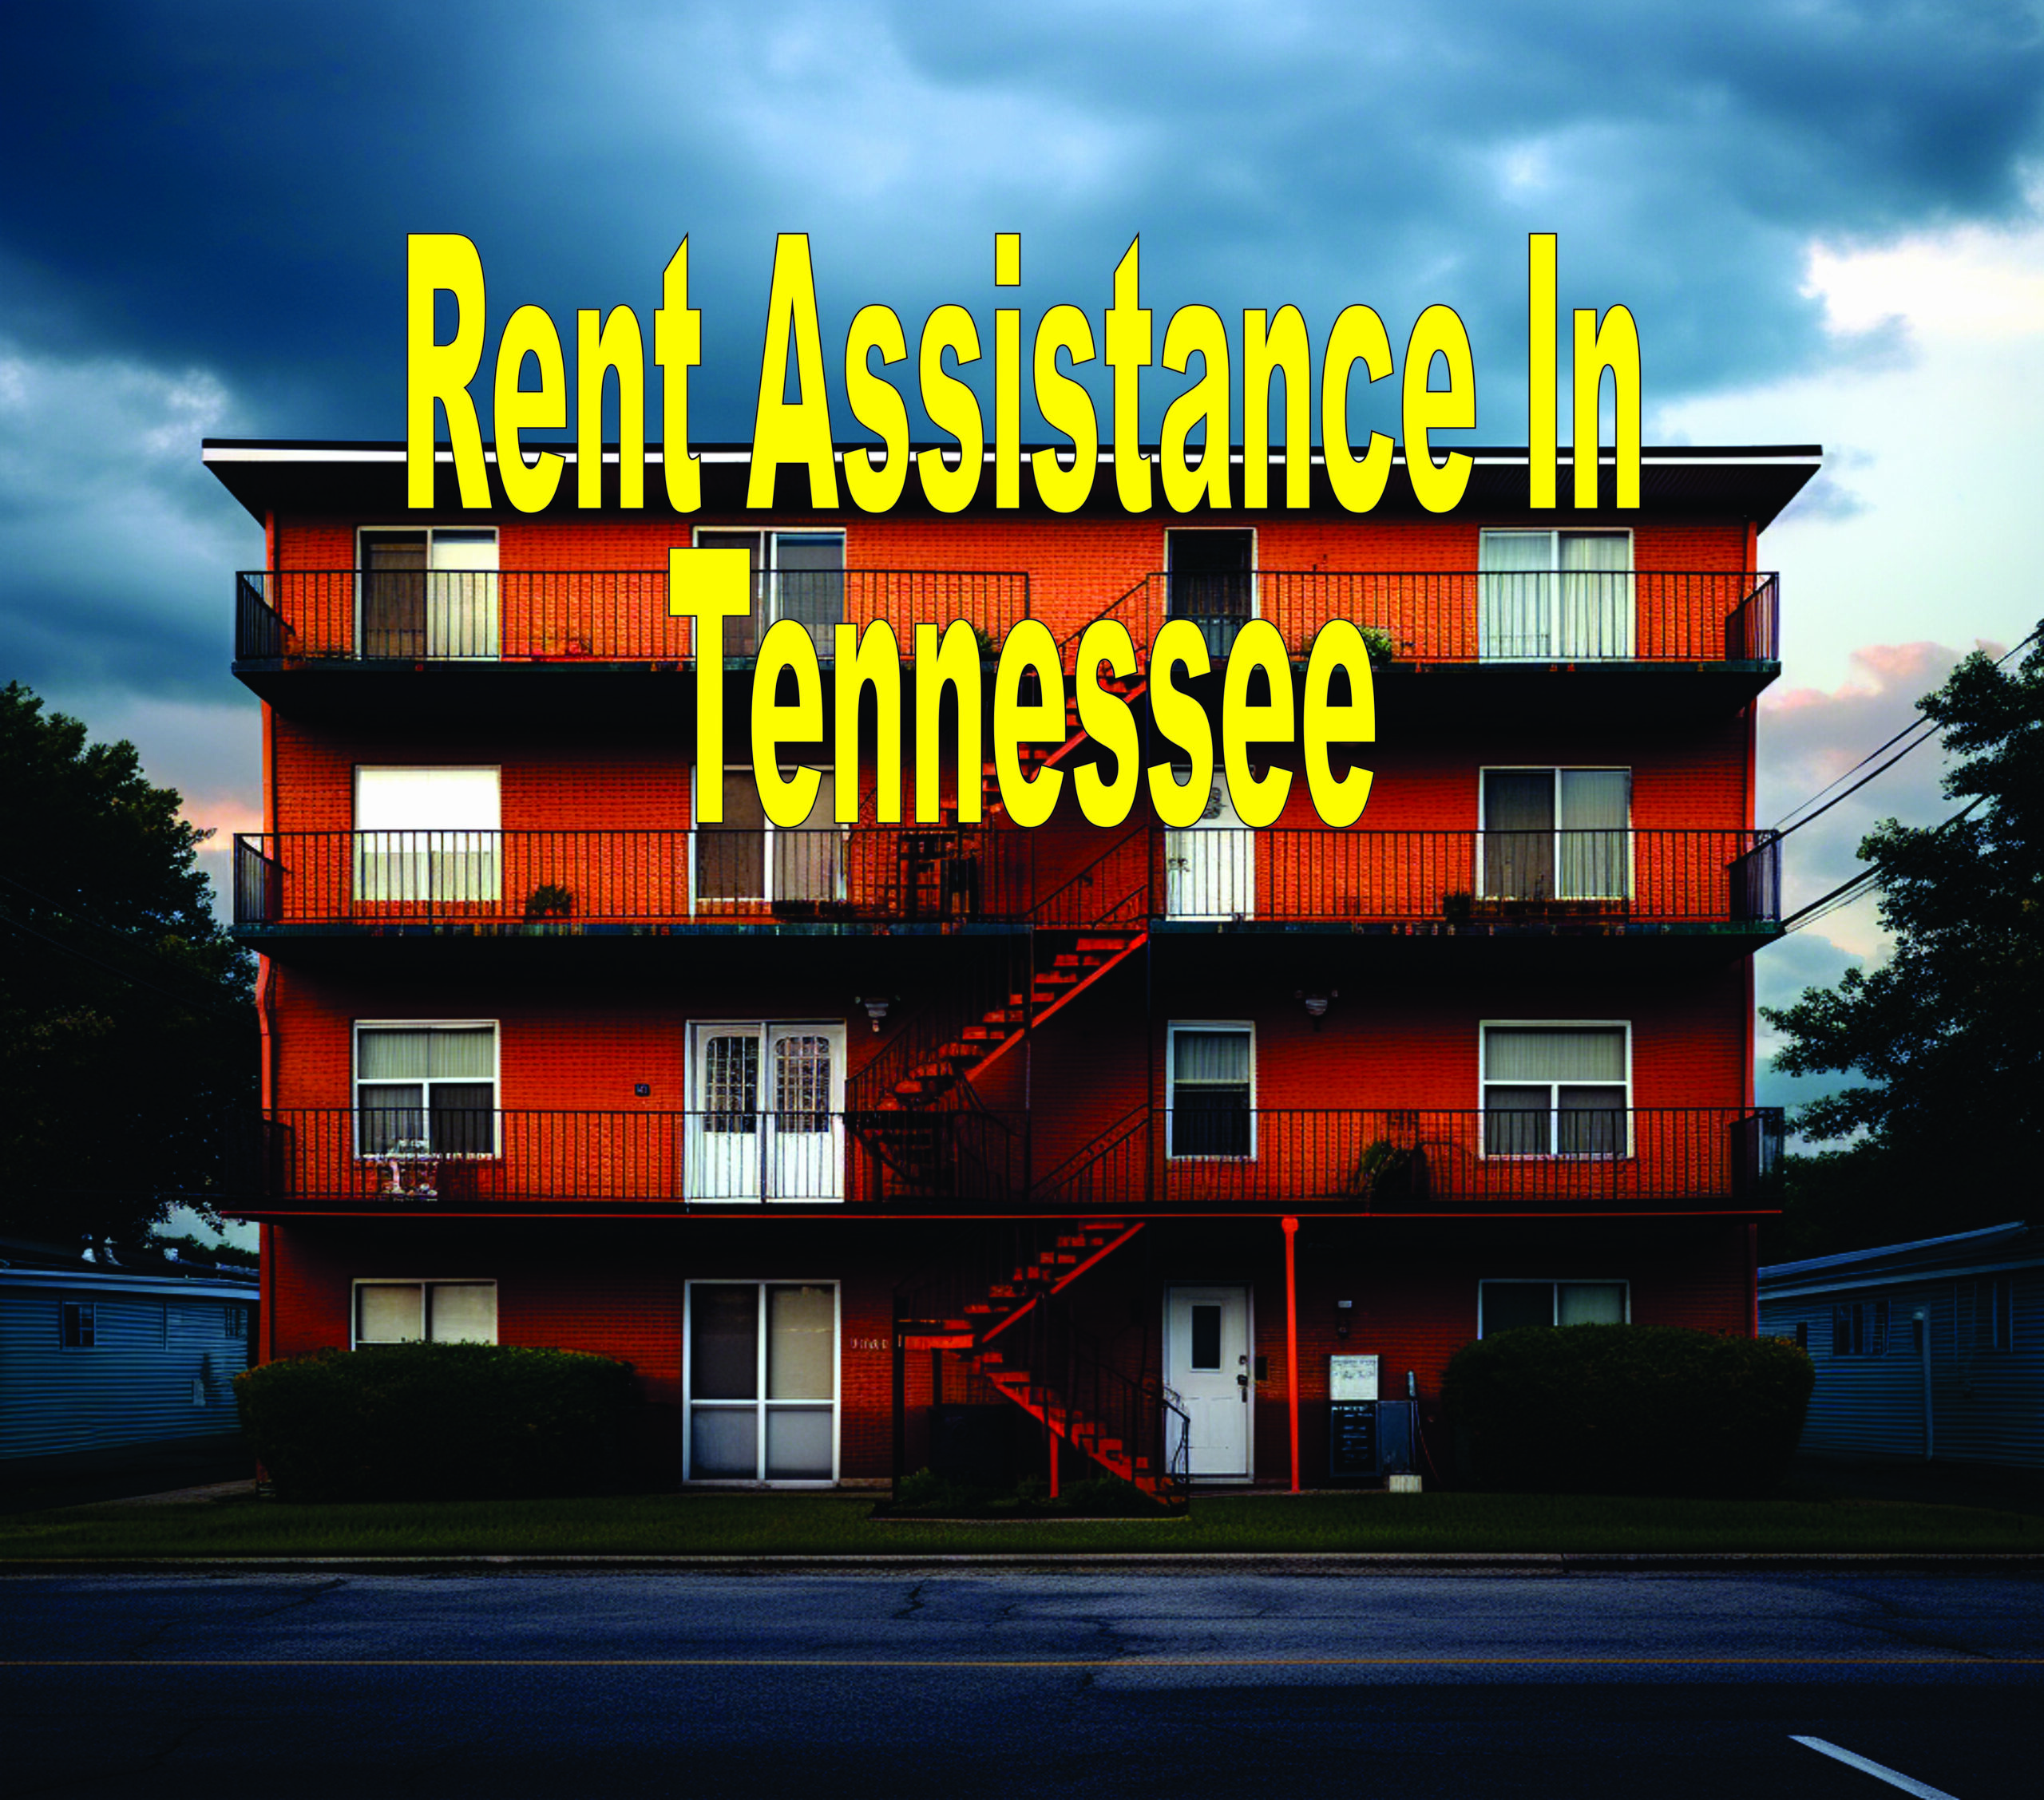 Rent Assistance In Tennessee